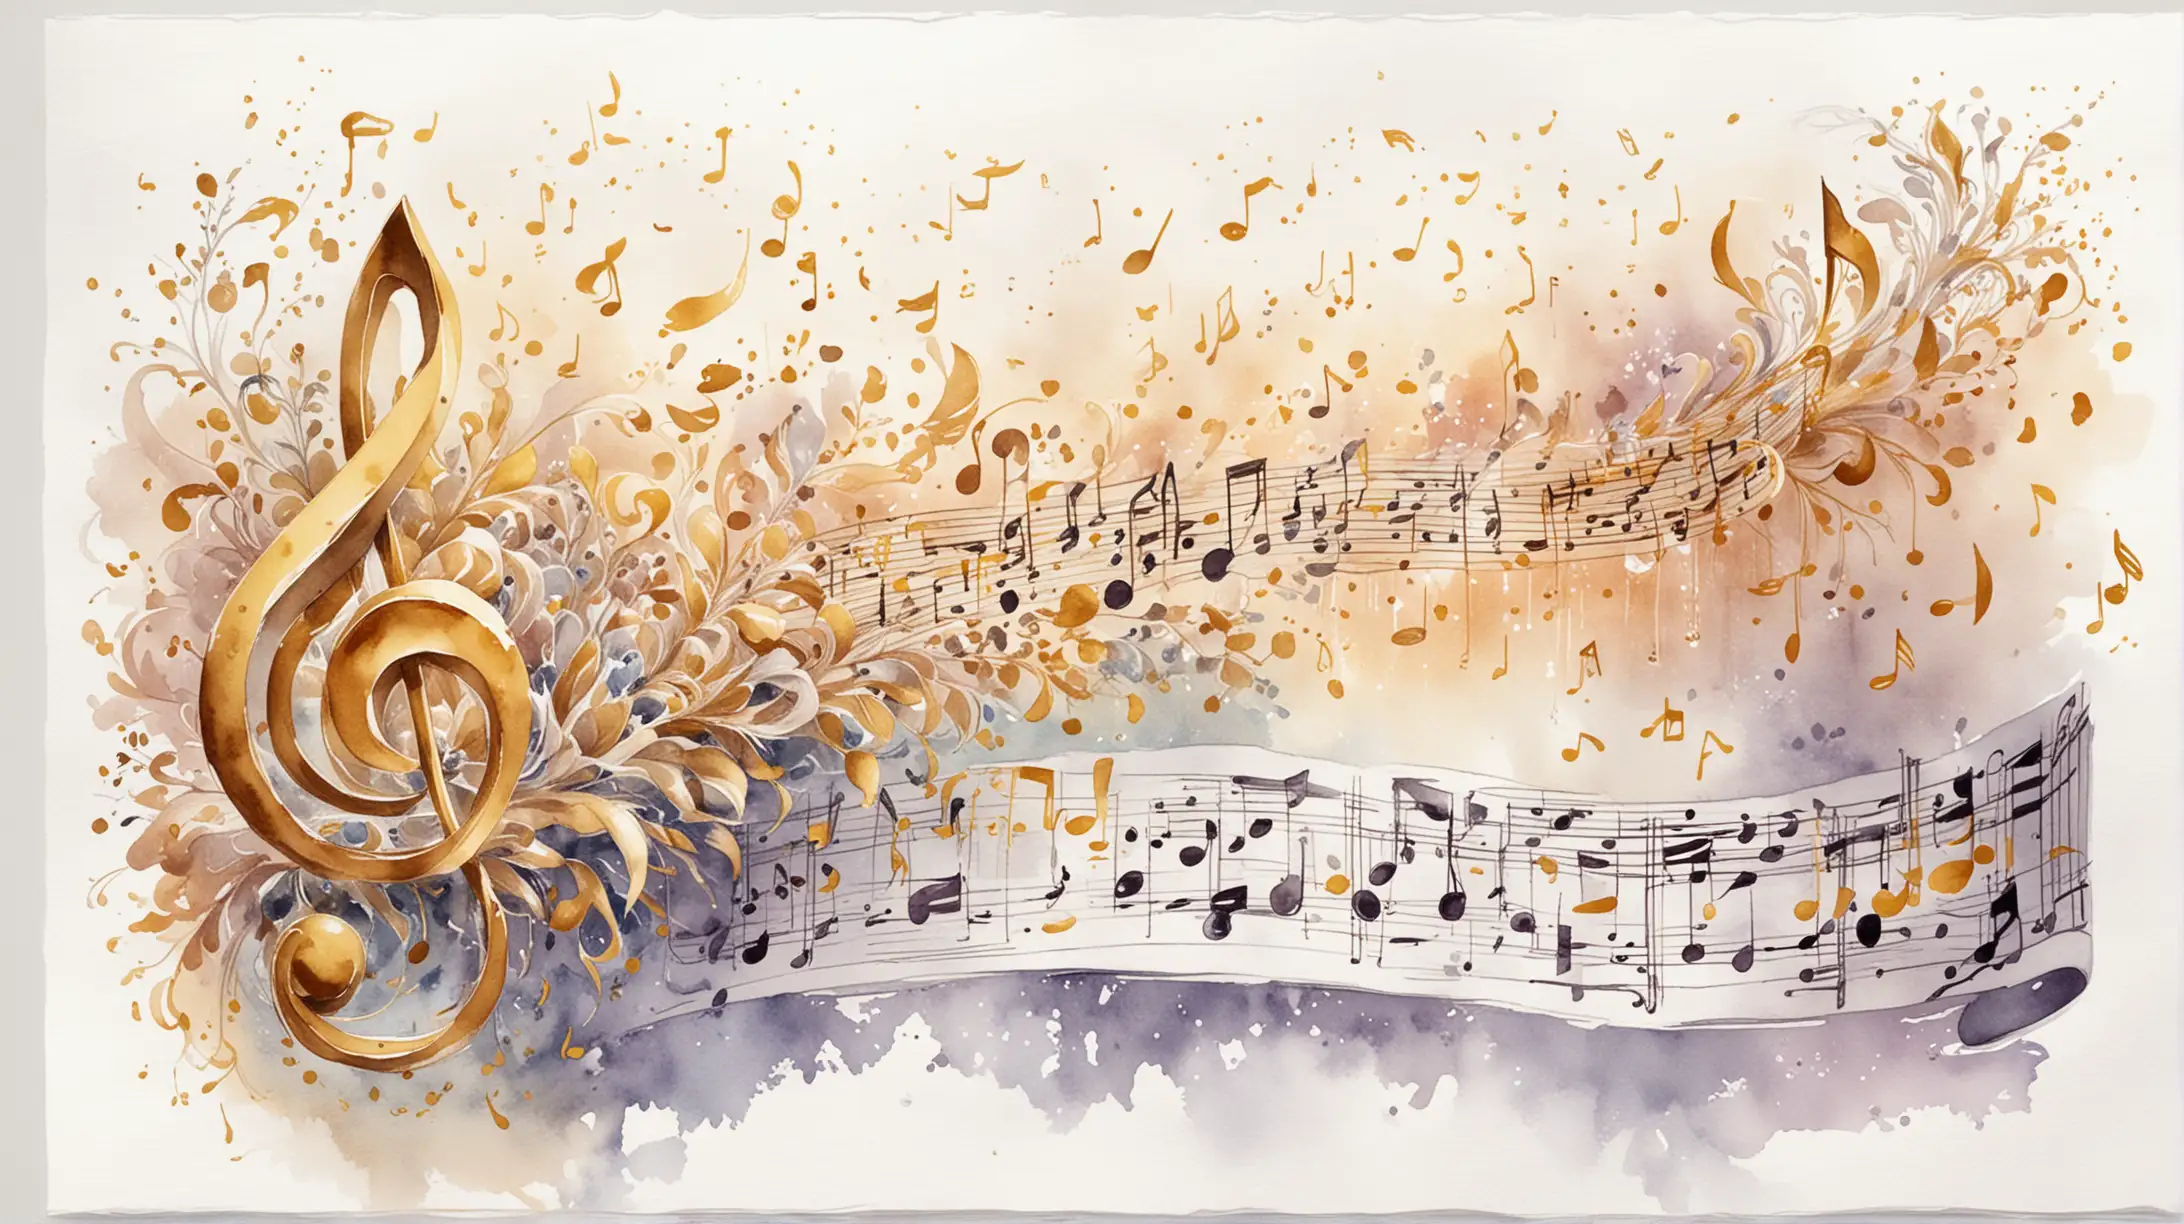 on a white background, painted in watercolor in anime style, curly sheet music with flying golden notes, spring waltz, inspiration, flight, fantasy